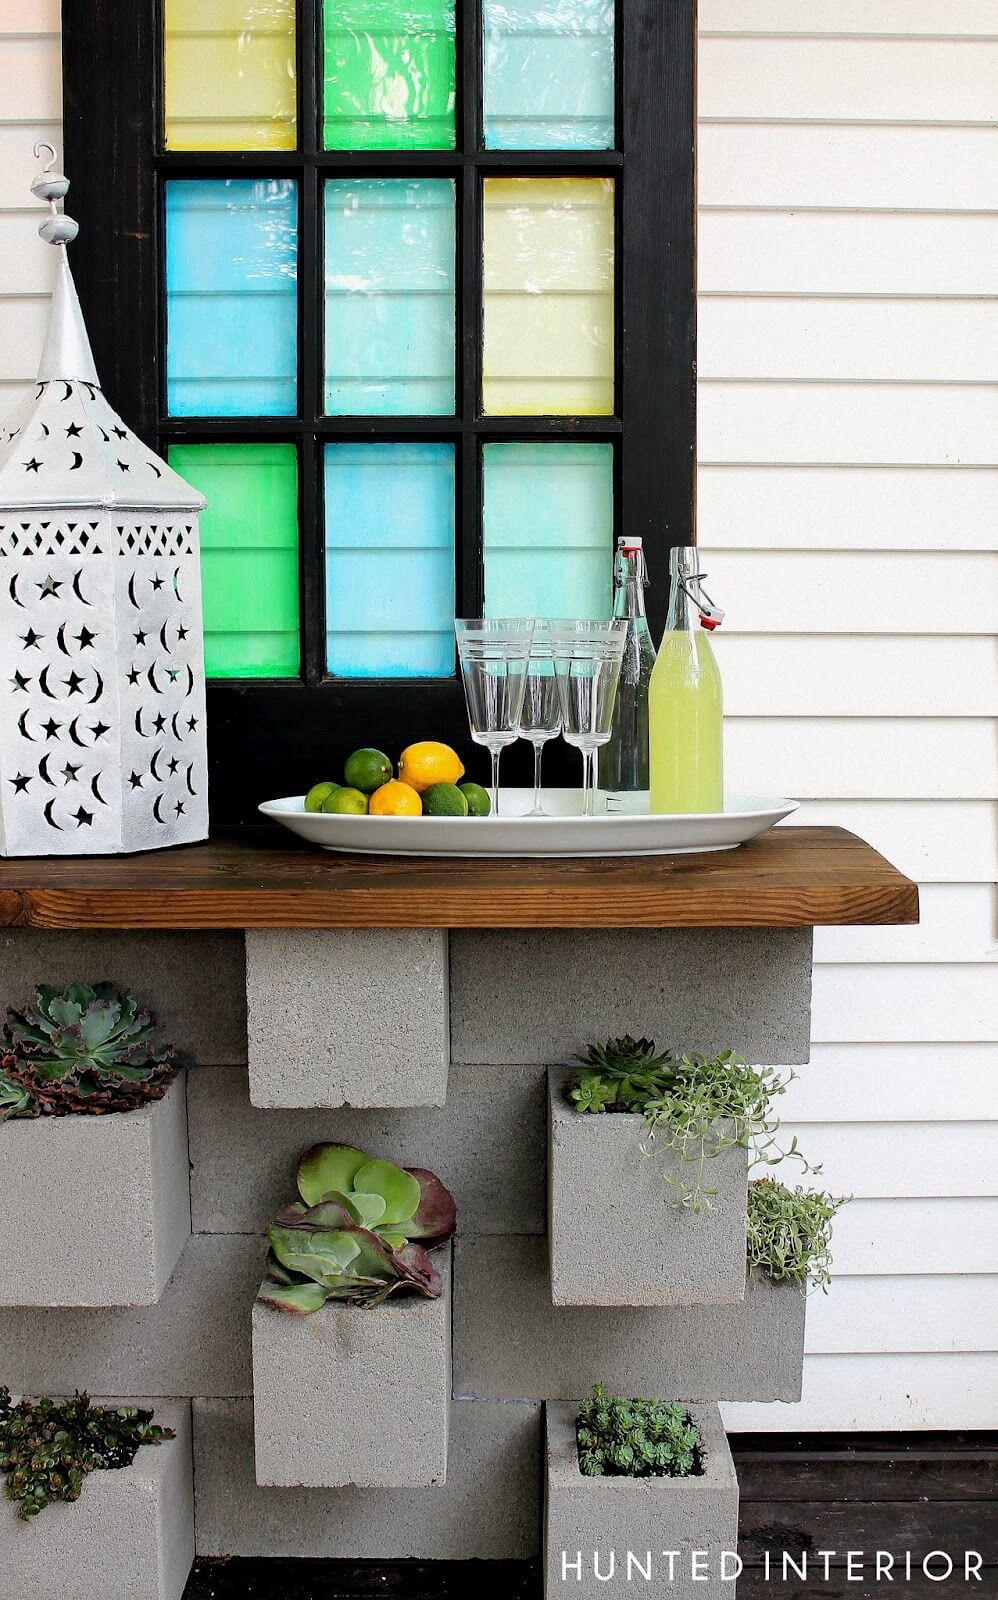 A Simple Wooden Shelf to Hold Drinks